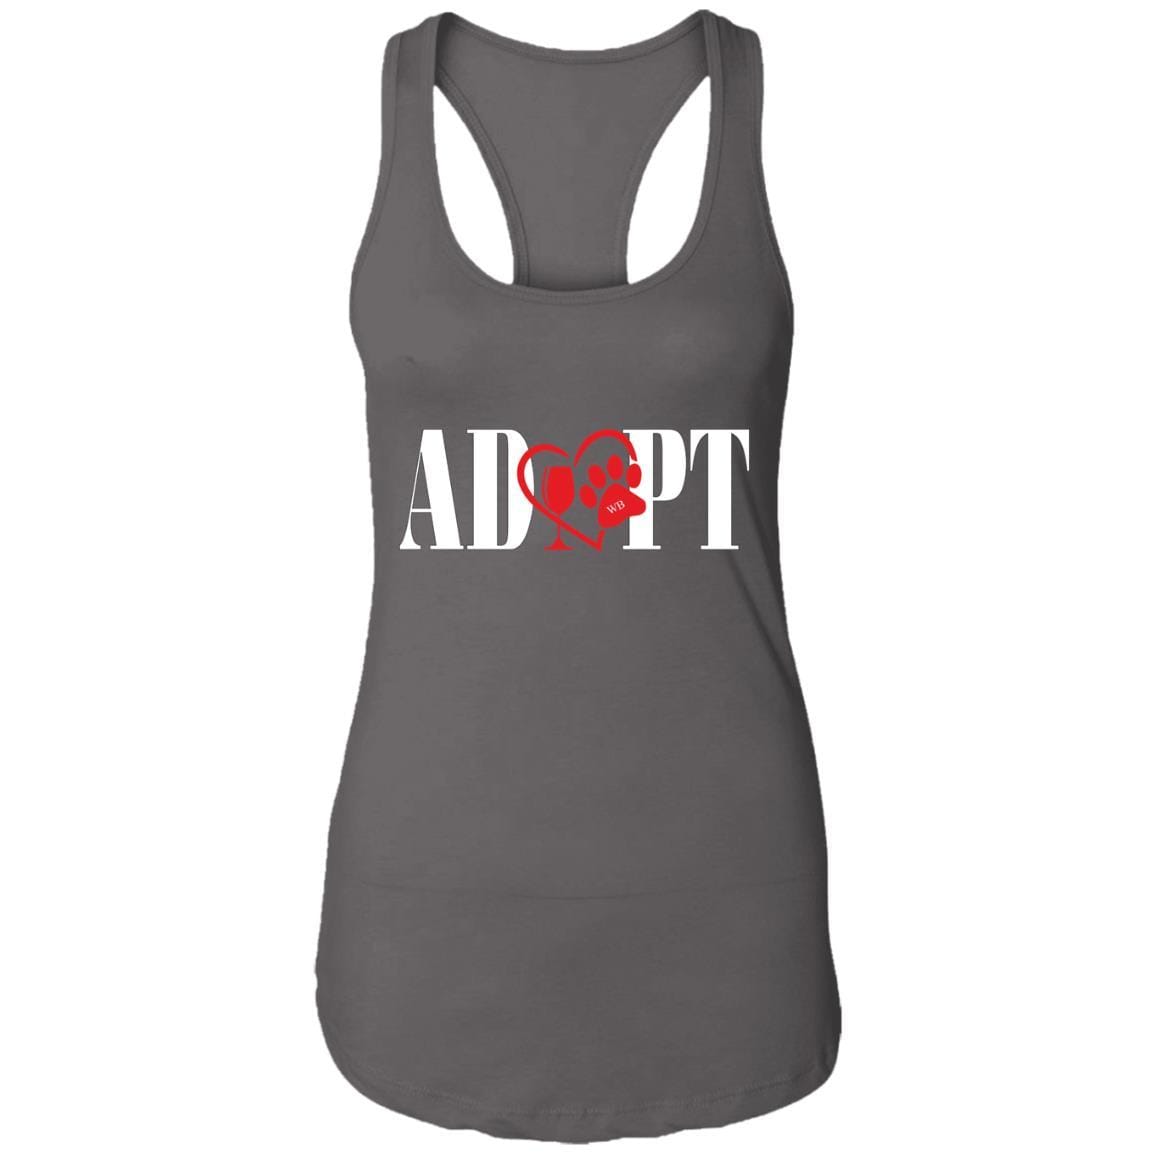 T-Shirts Dark Grey / X-Small WineyBitches.Co “Adopt” Ladies Ideal Racerback Tank-Red Heart - Wht Lettering WineyBitchesCo